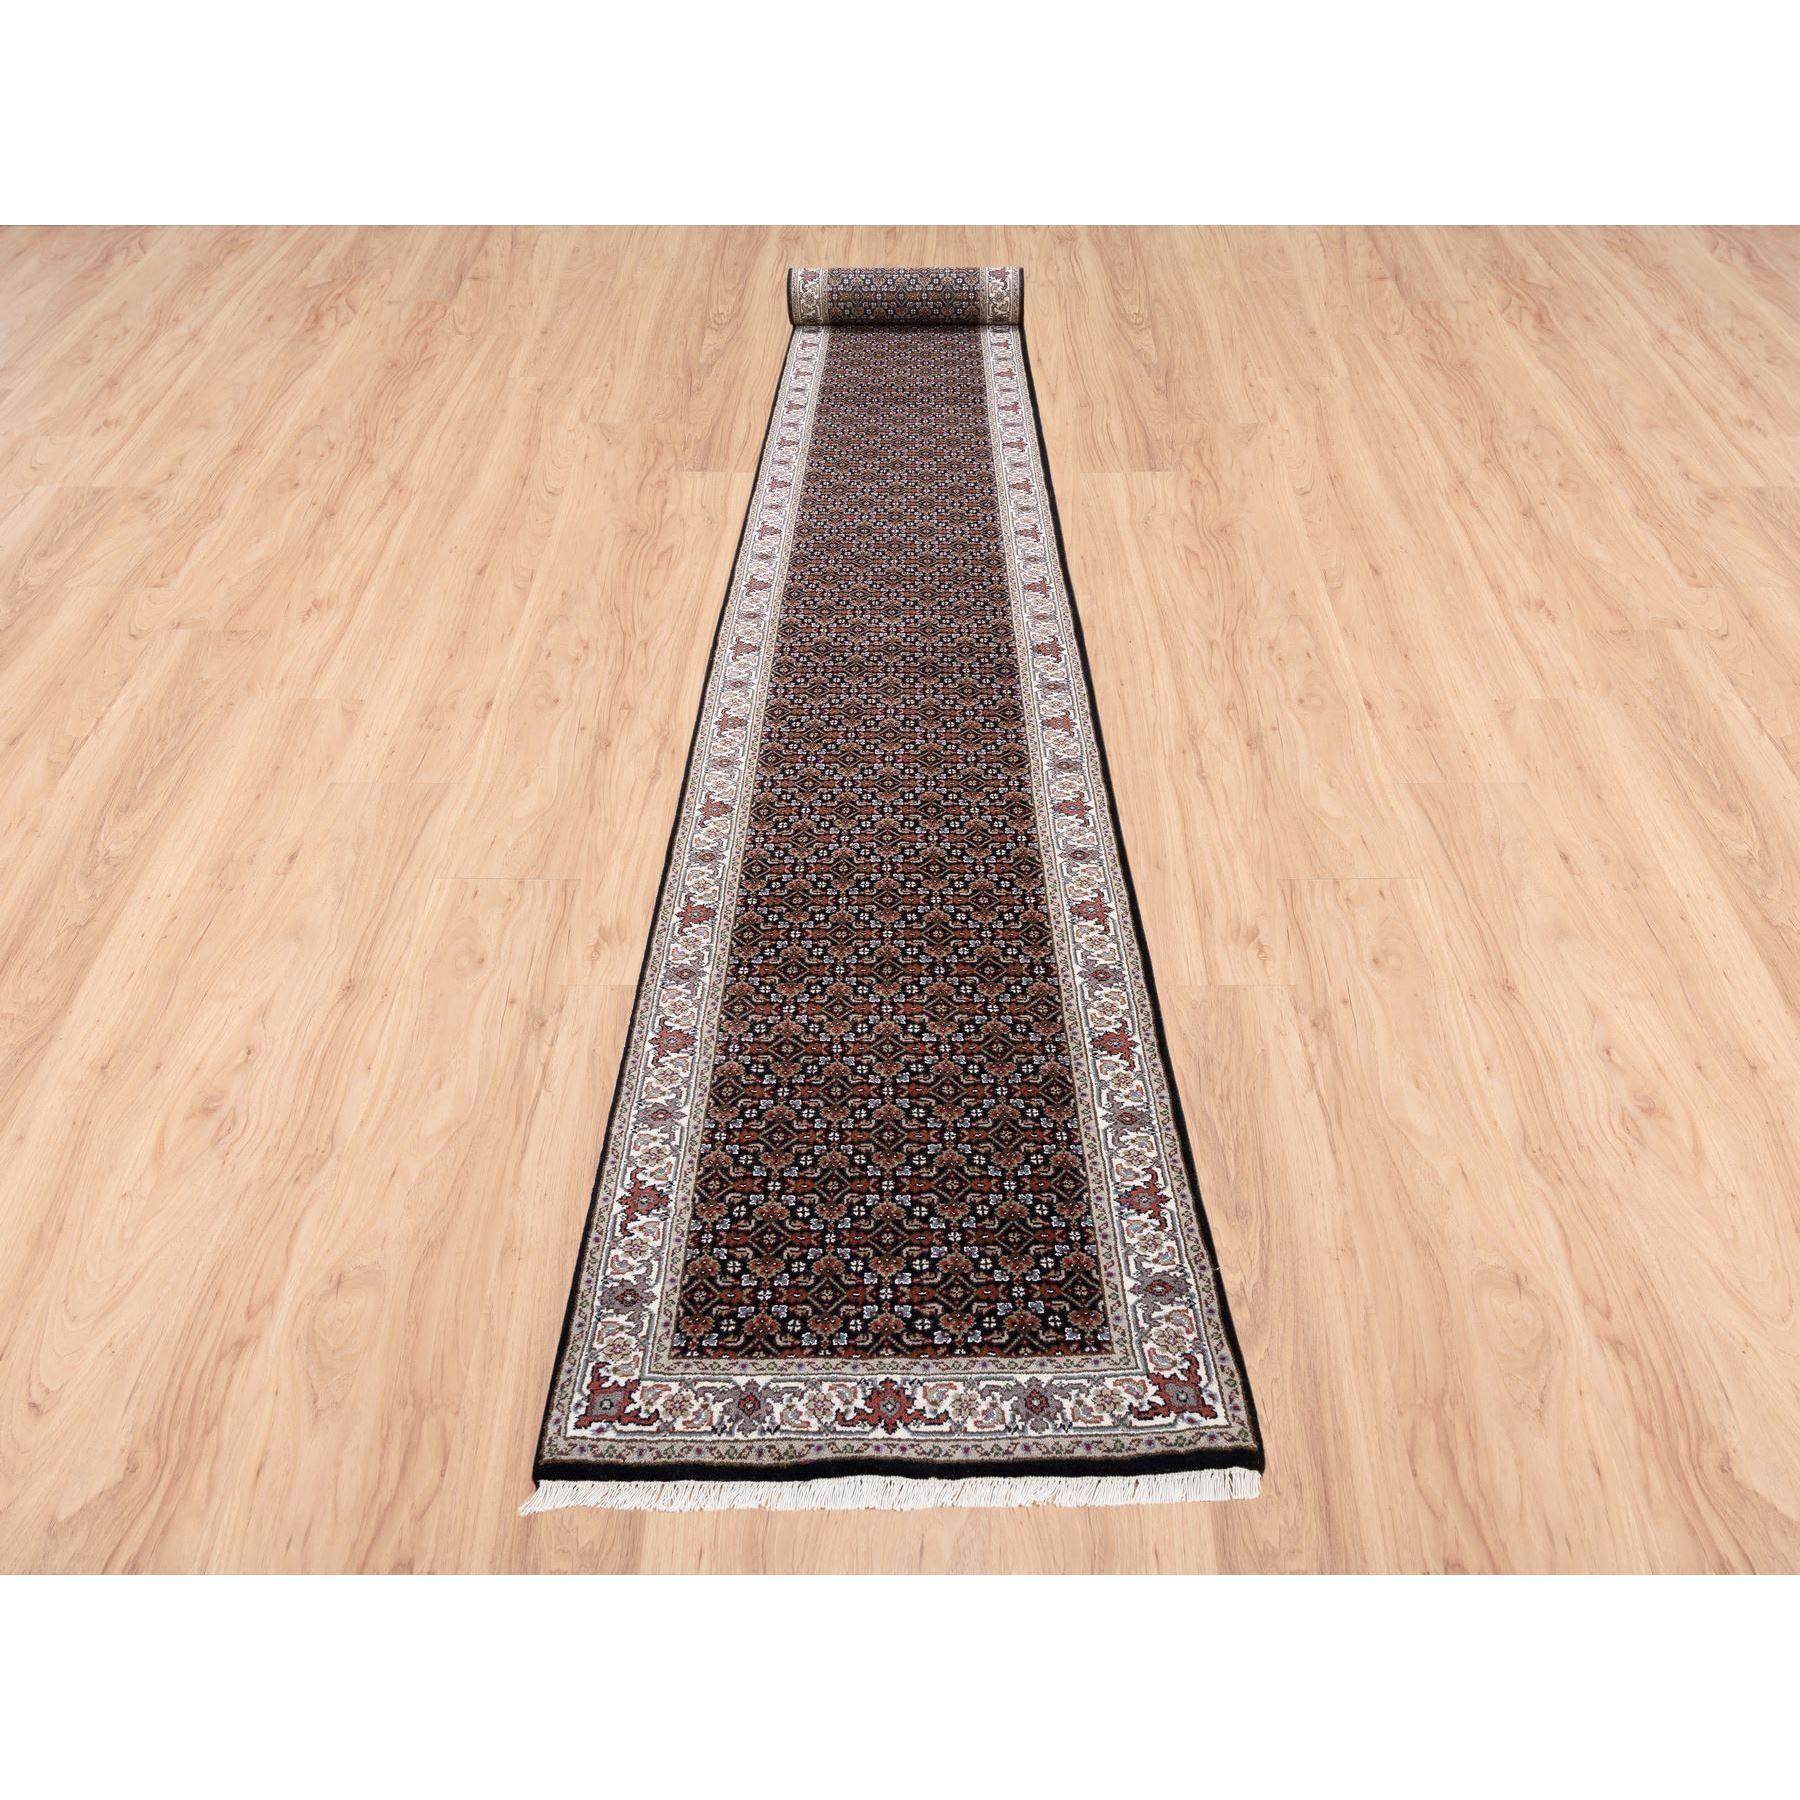 2'5"x20' Charcoal Black Herati With All Over Design Luxurious Wool and Silk 175 KPSI Hand Woven Oriental XL Runner Rug 